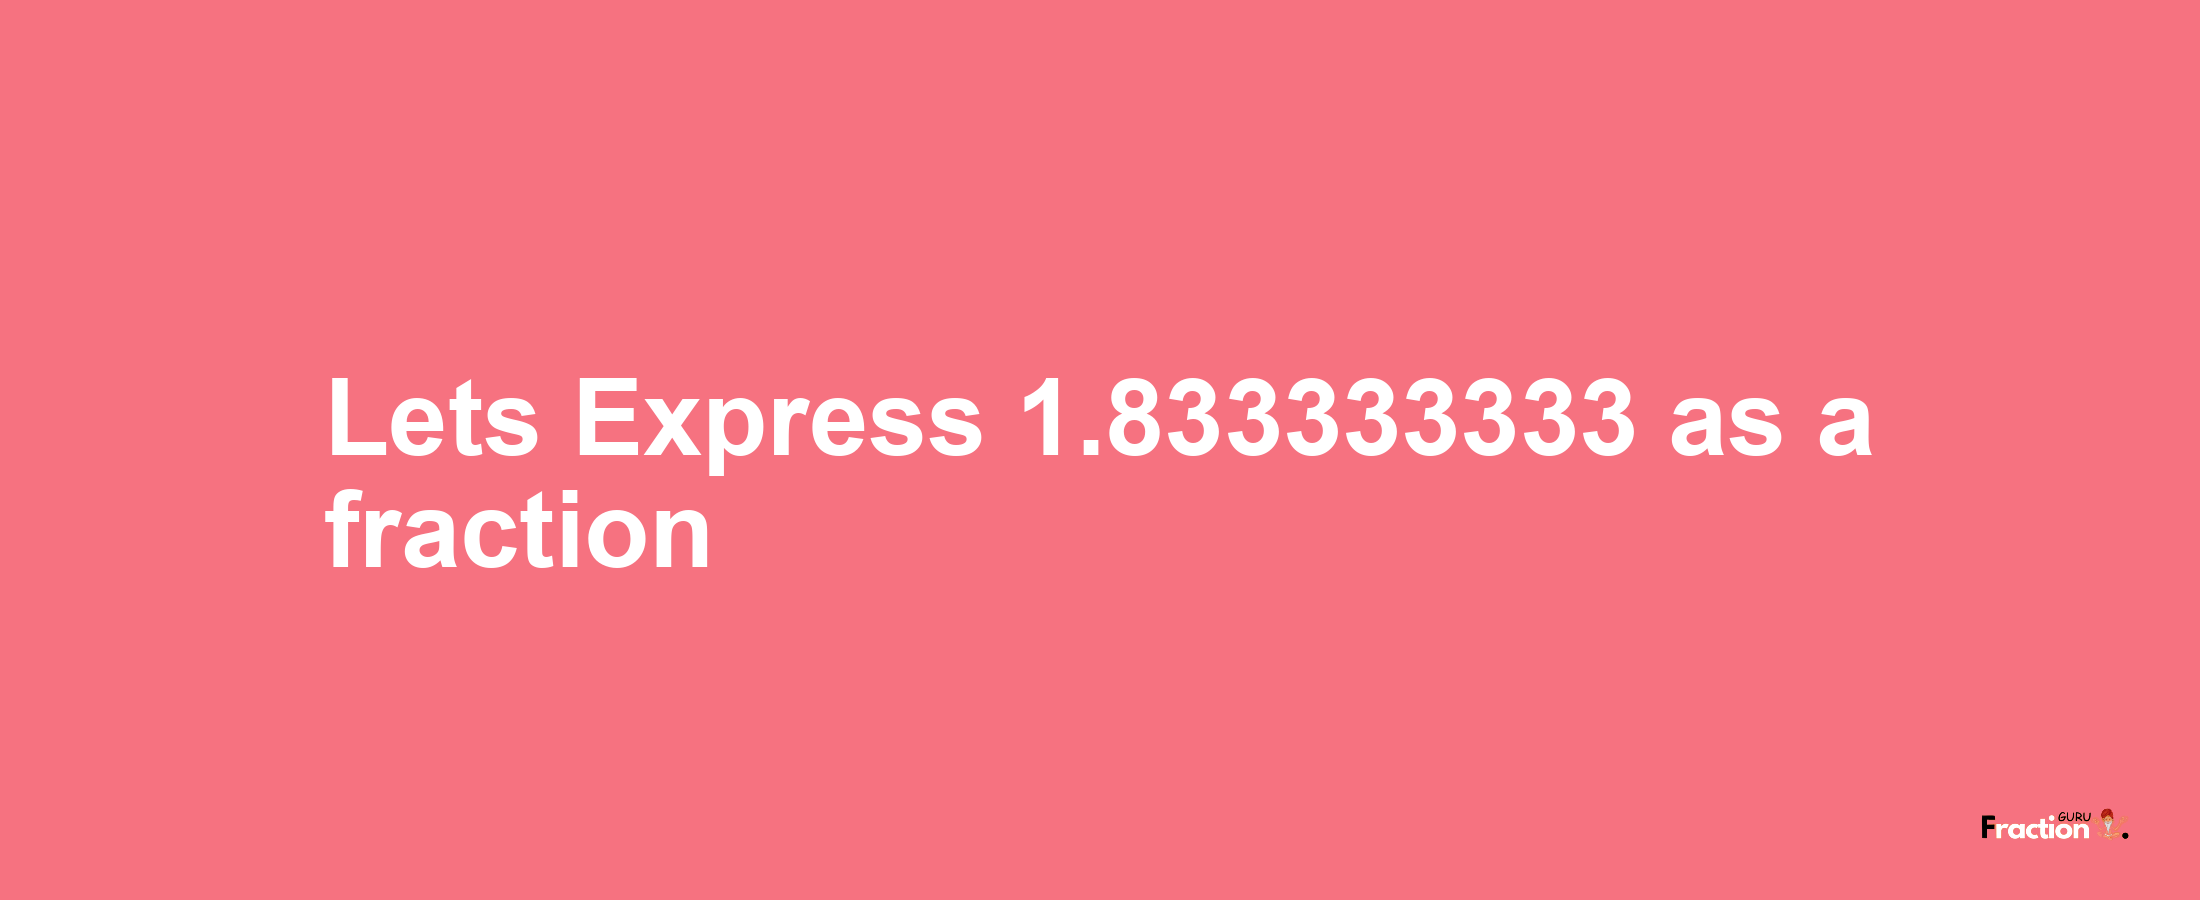 Lets Express 1.833333333 as afraction